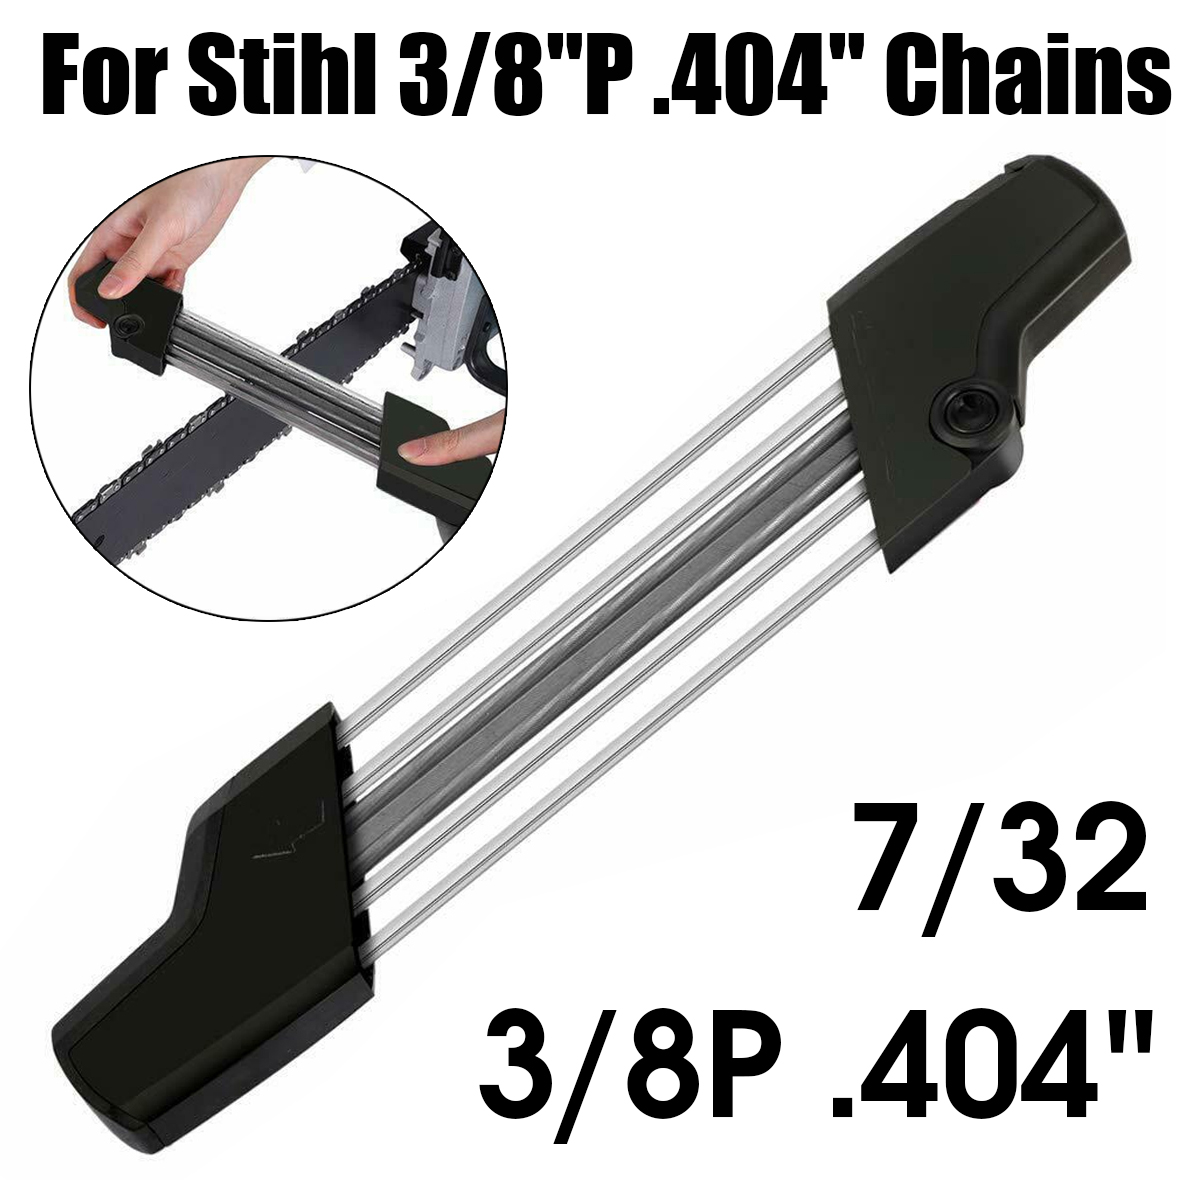 

2 IN 1 Easy Chainsaw Chain File Sharpener 7/32 3/8P .404 Inch Chain Saw Sharpener Replace For Stihl